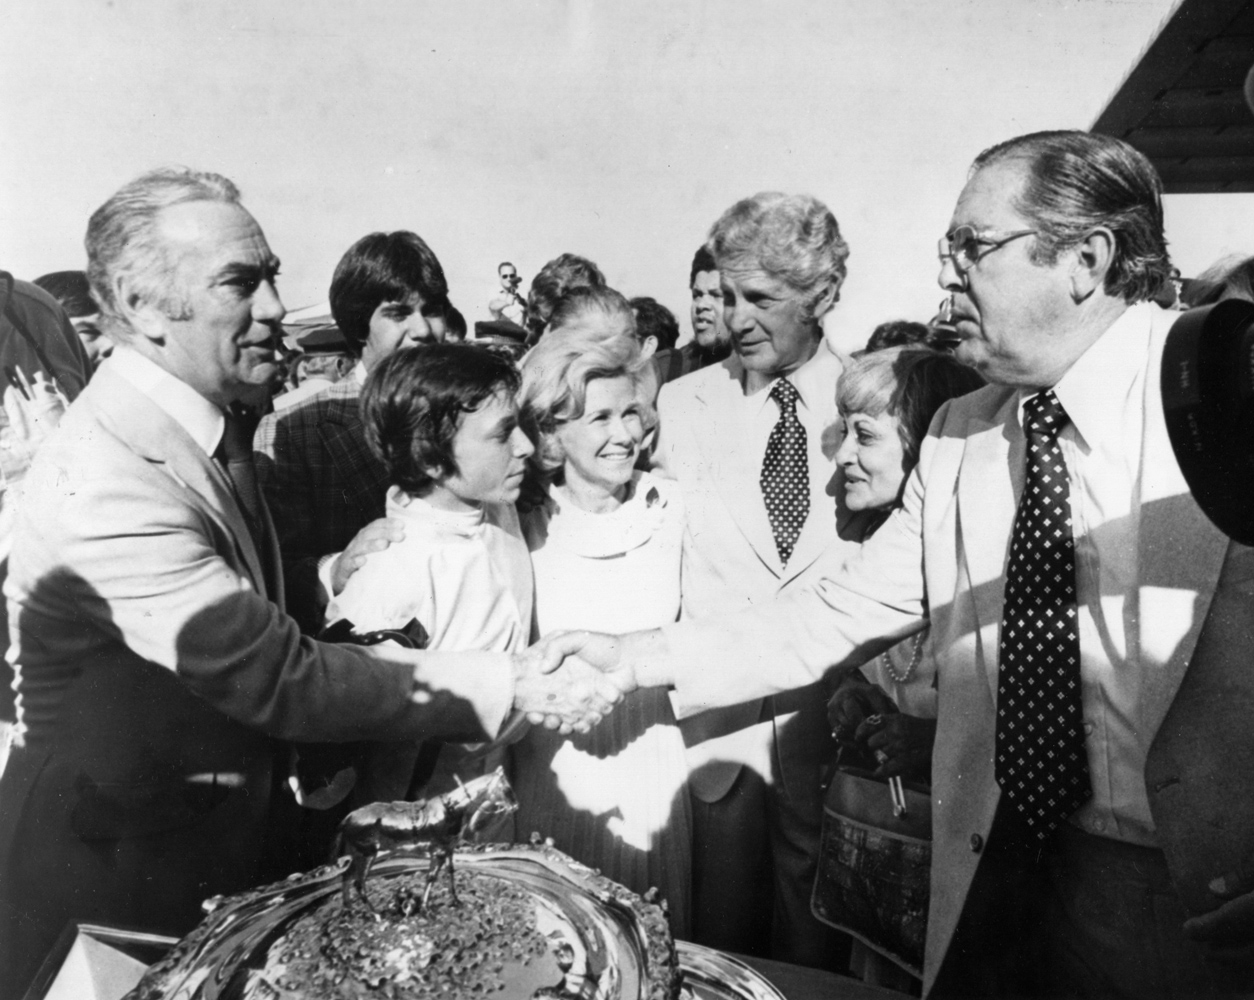 New York Governor Carey congratulates the winning connections of Affirmed after their horse wins the 1978 Belmont Stakes and Triple Crown (NYRA/Museum Collection)